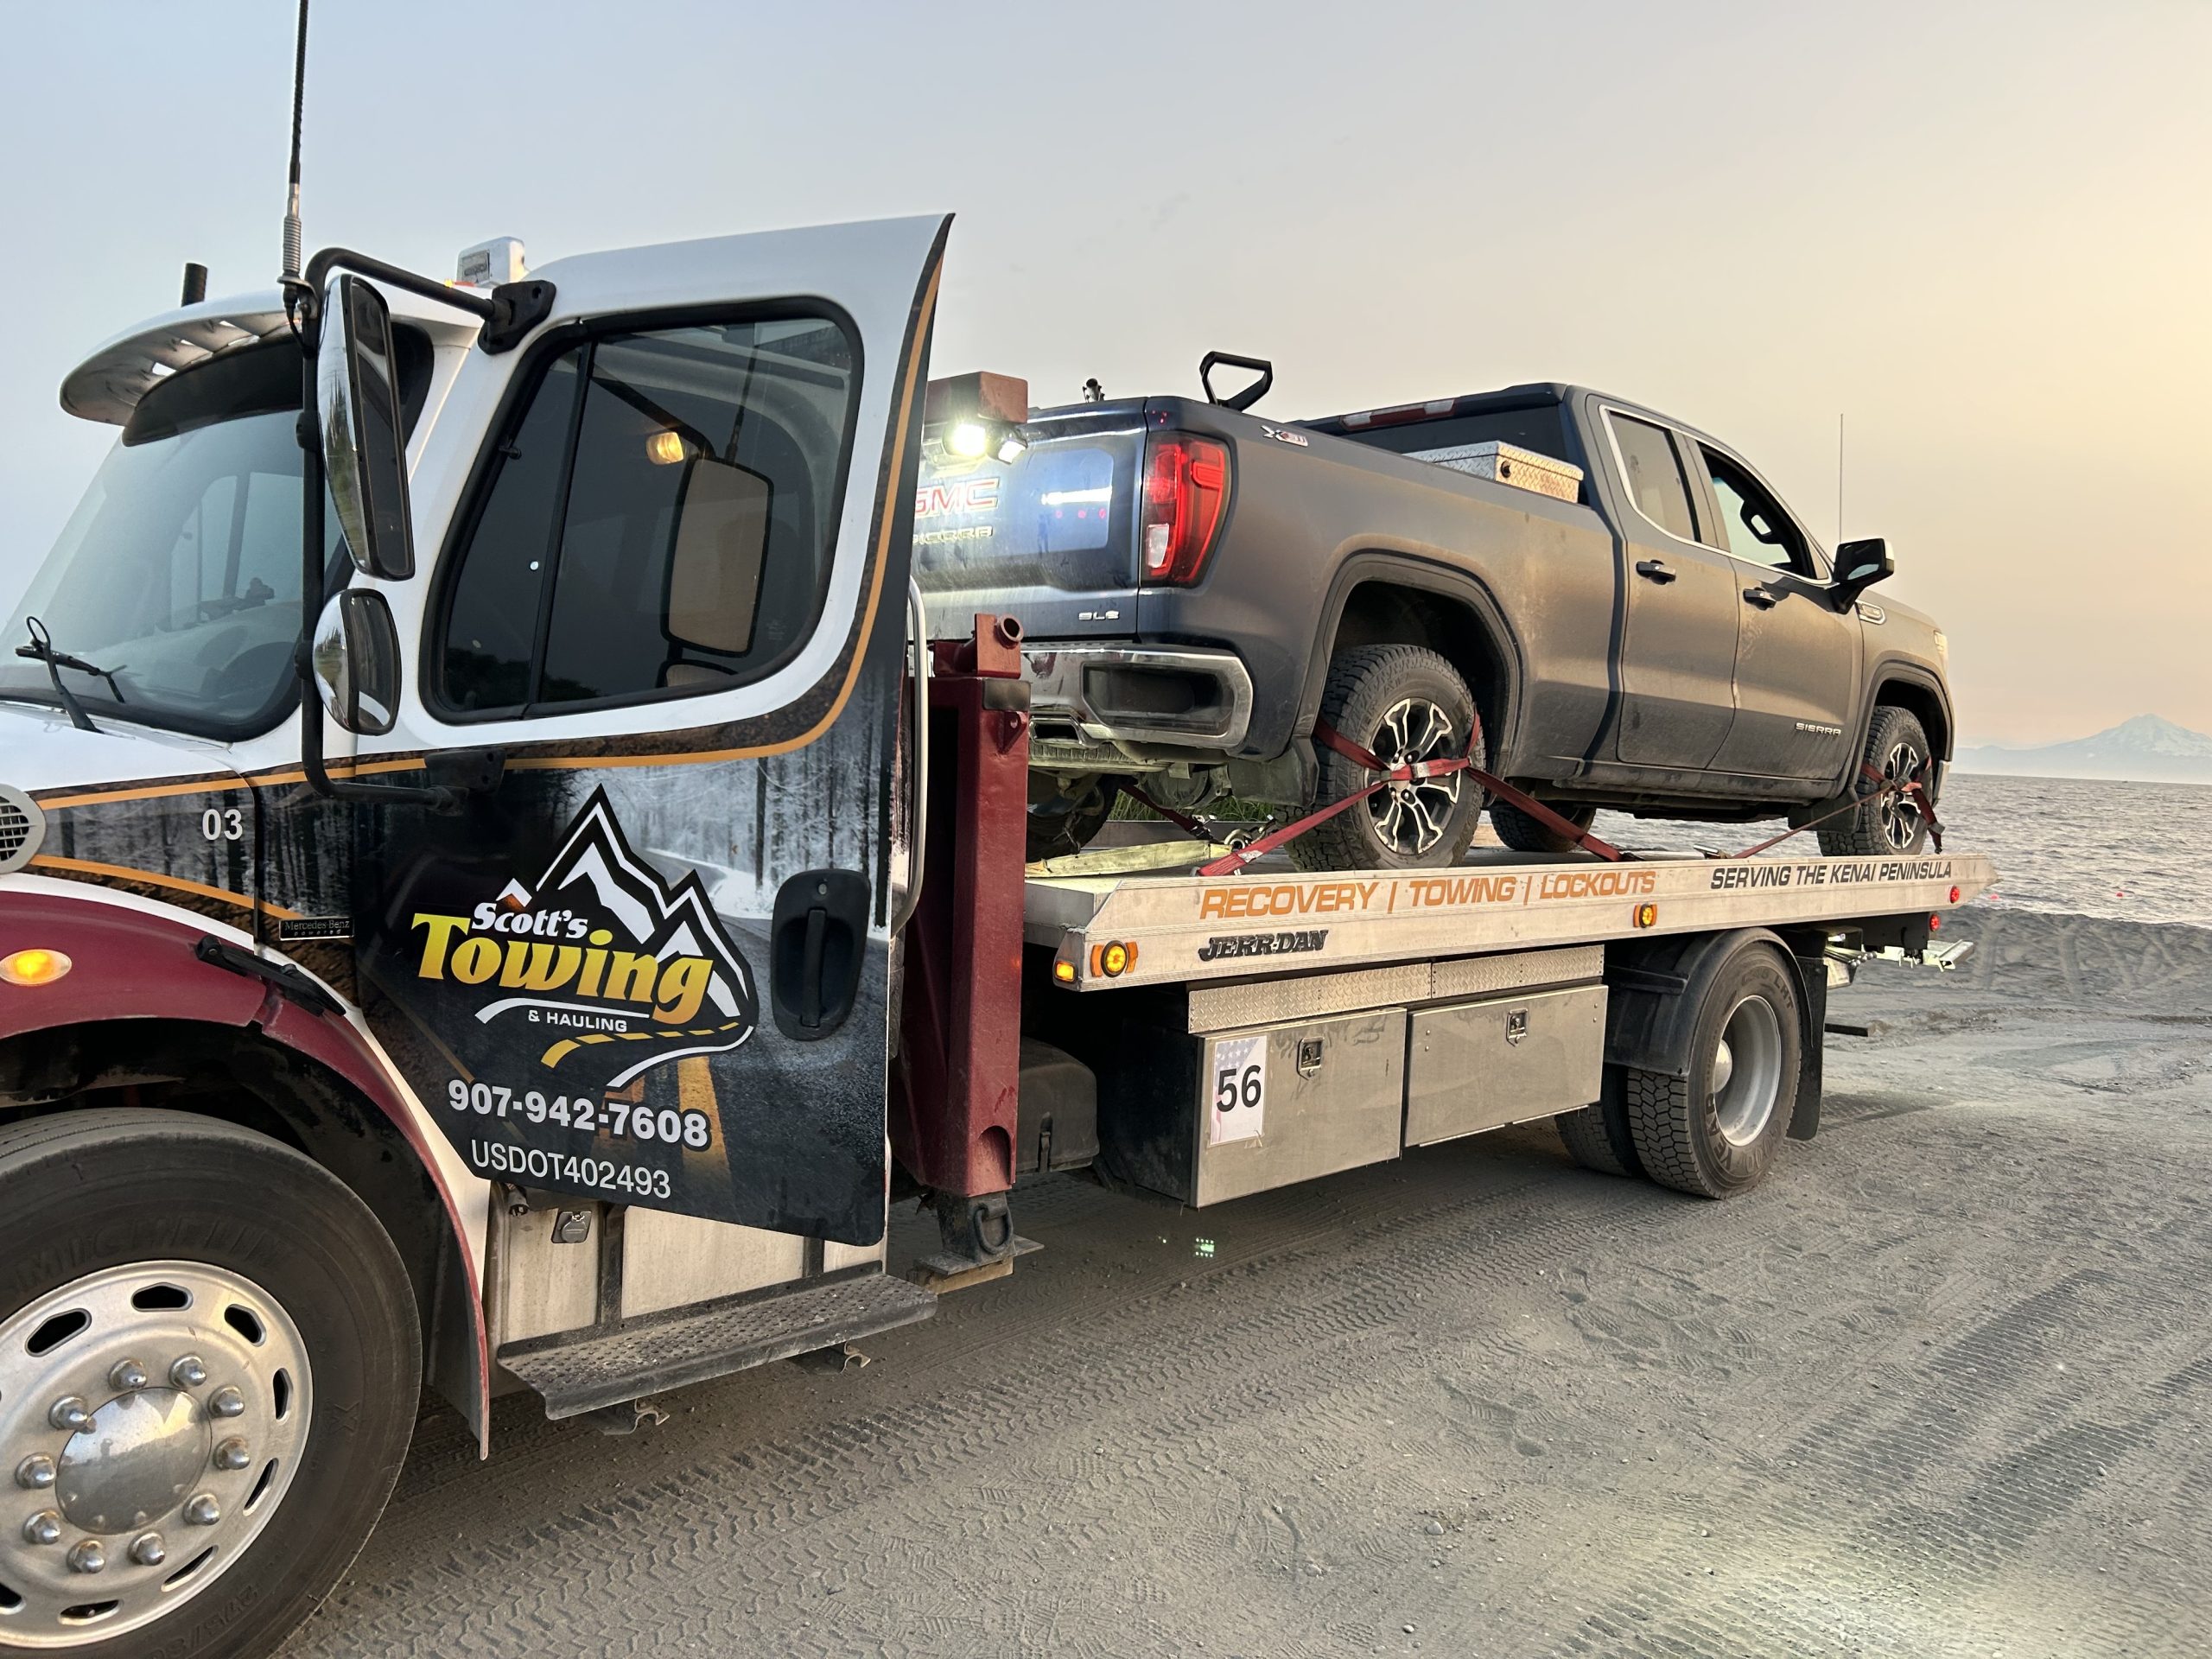 this image shows towing services in Homer, AK